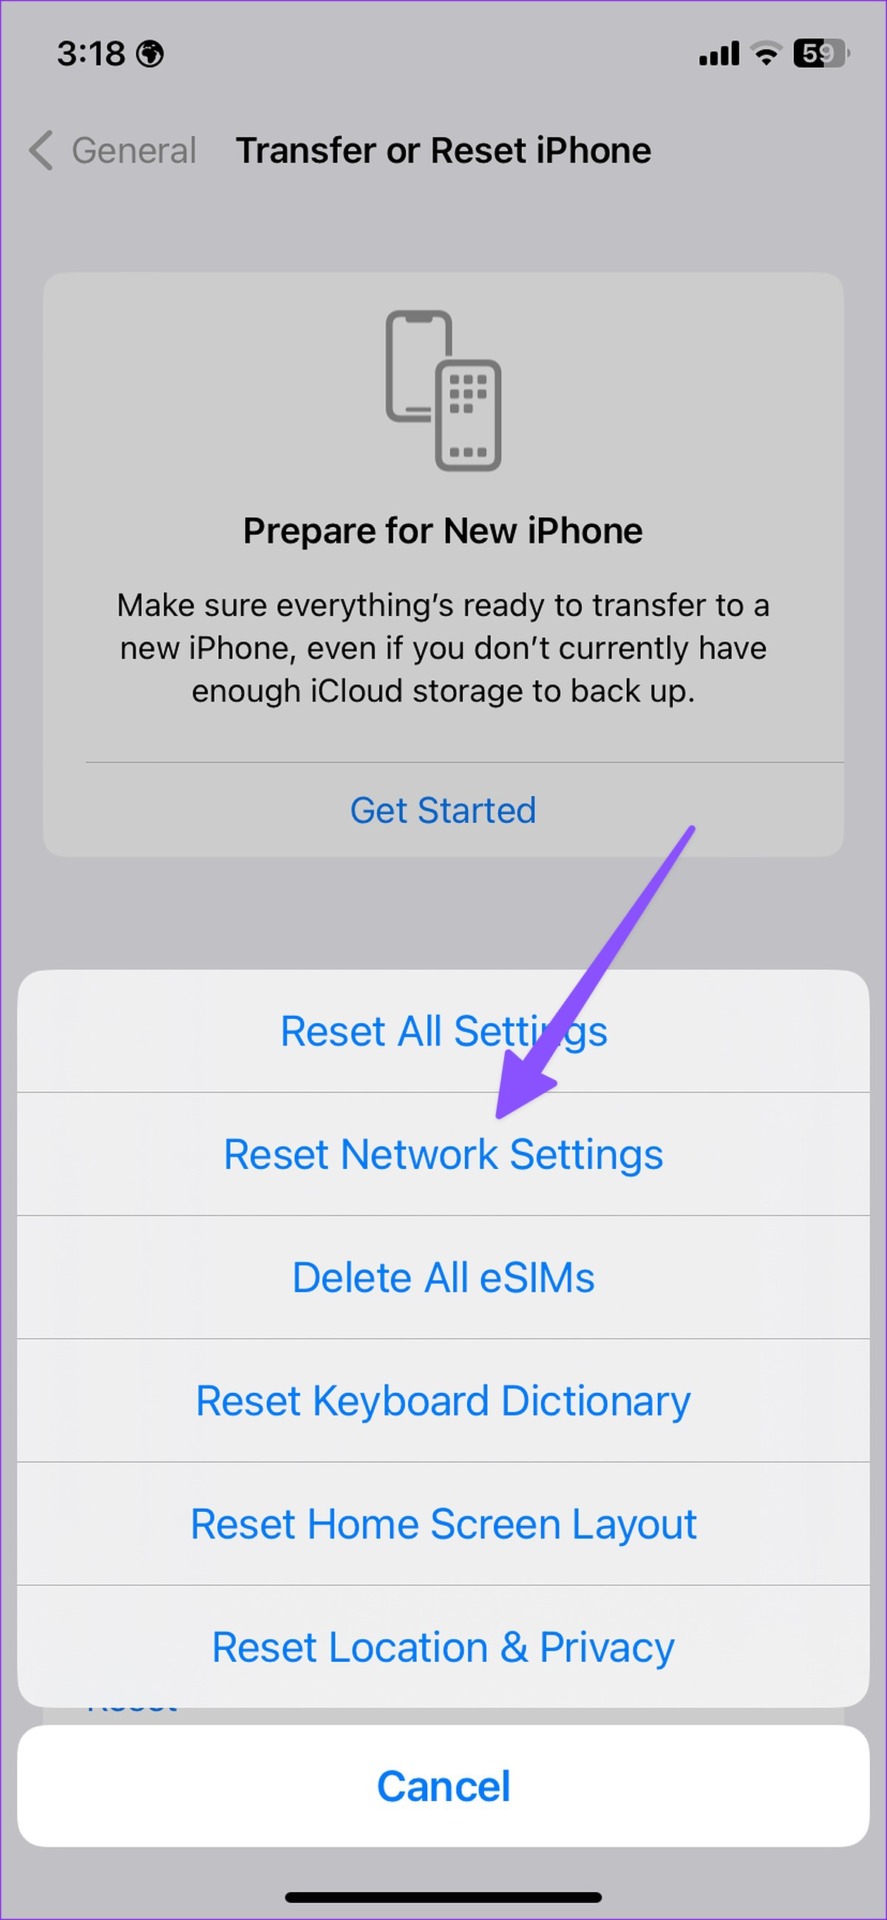 reset network settings on iPhone